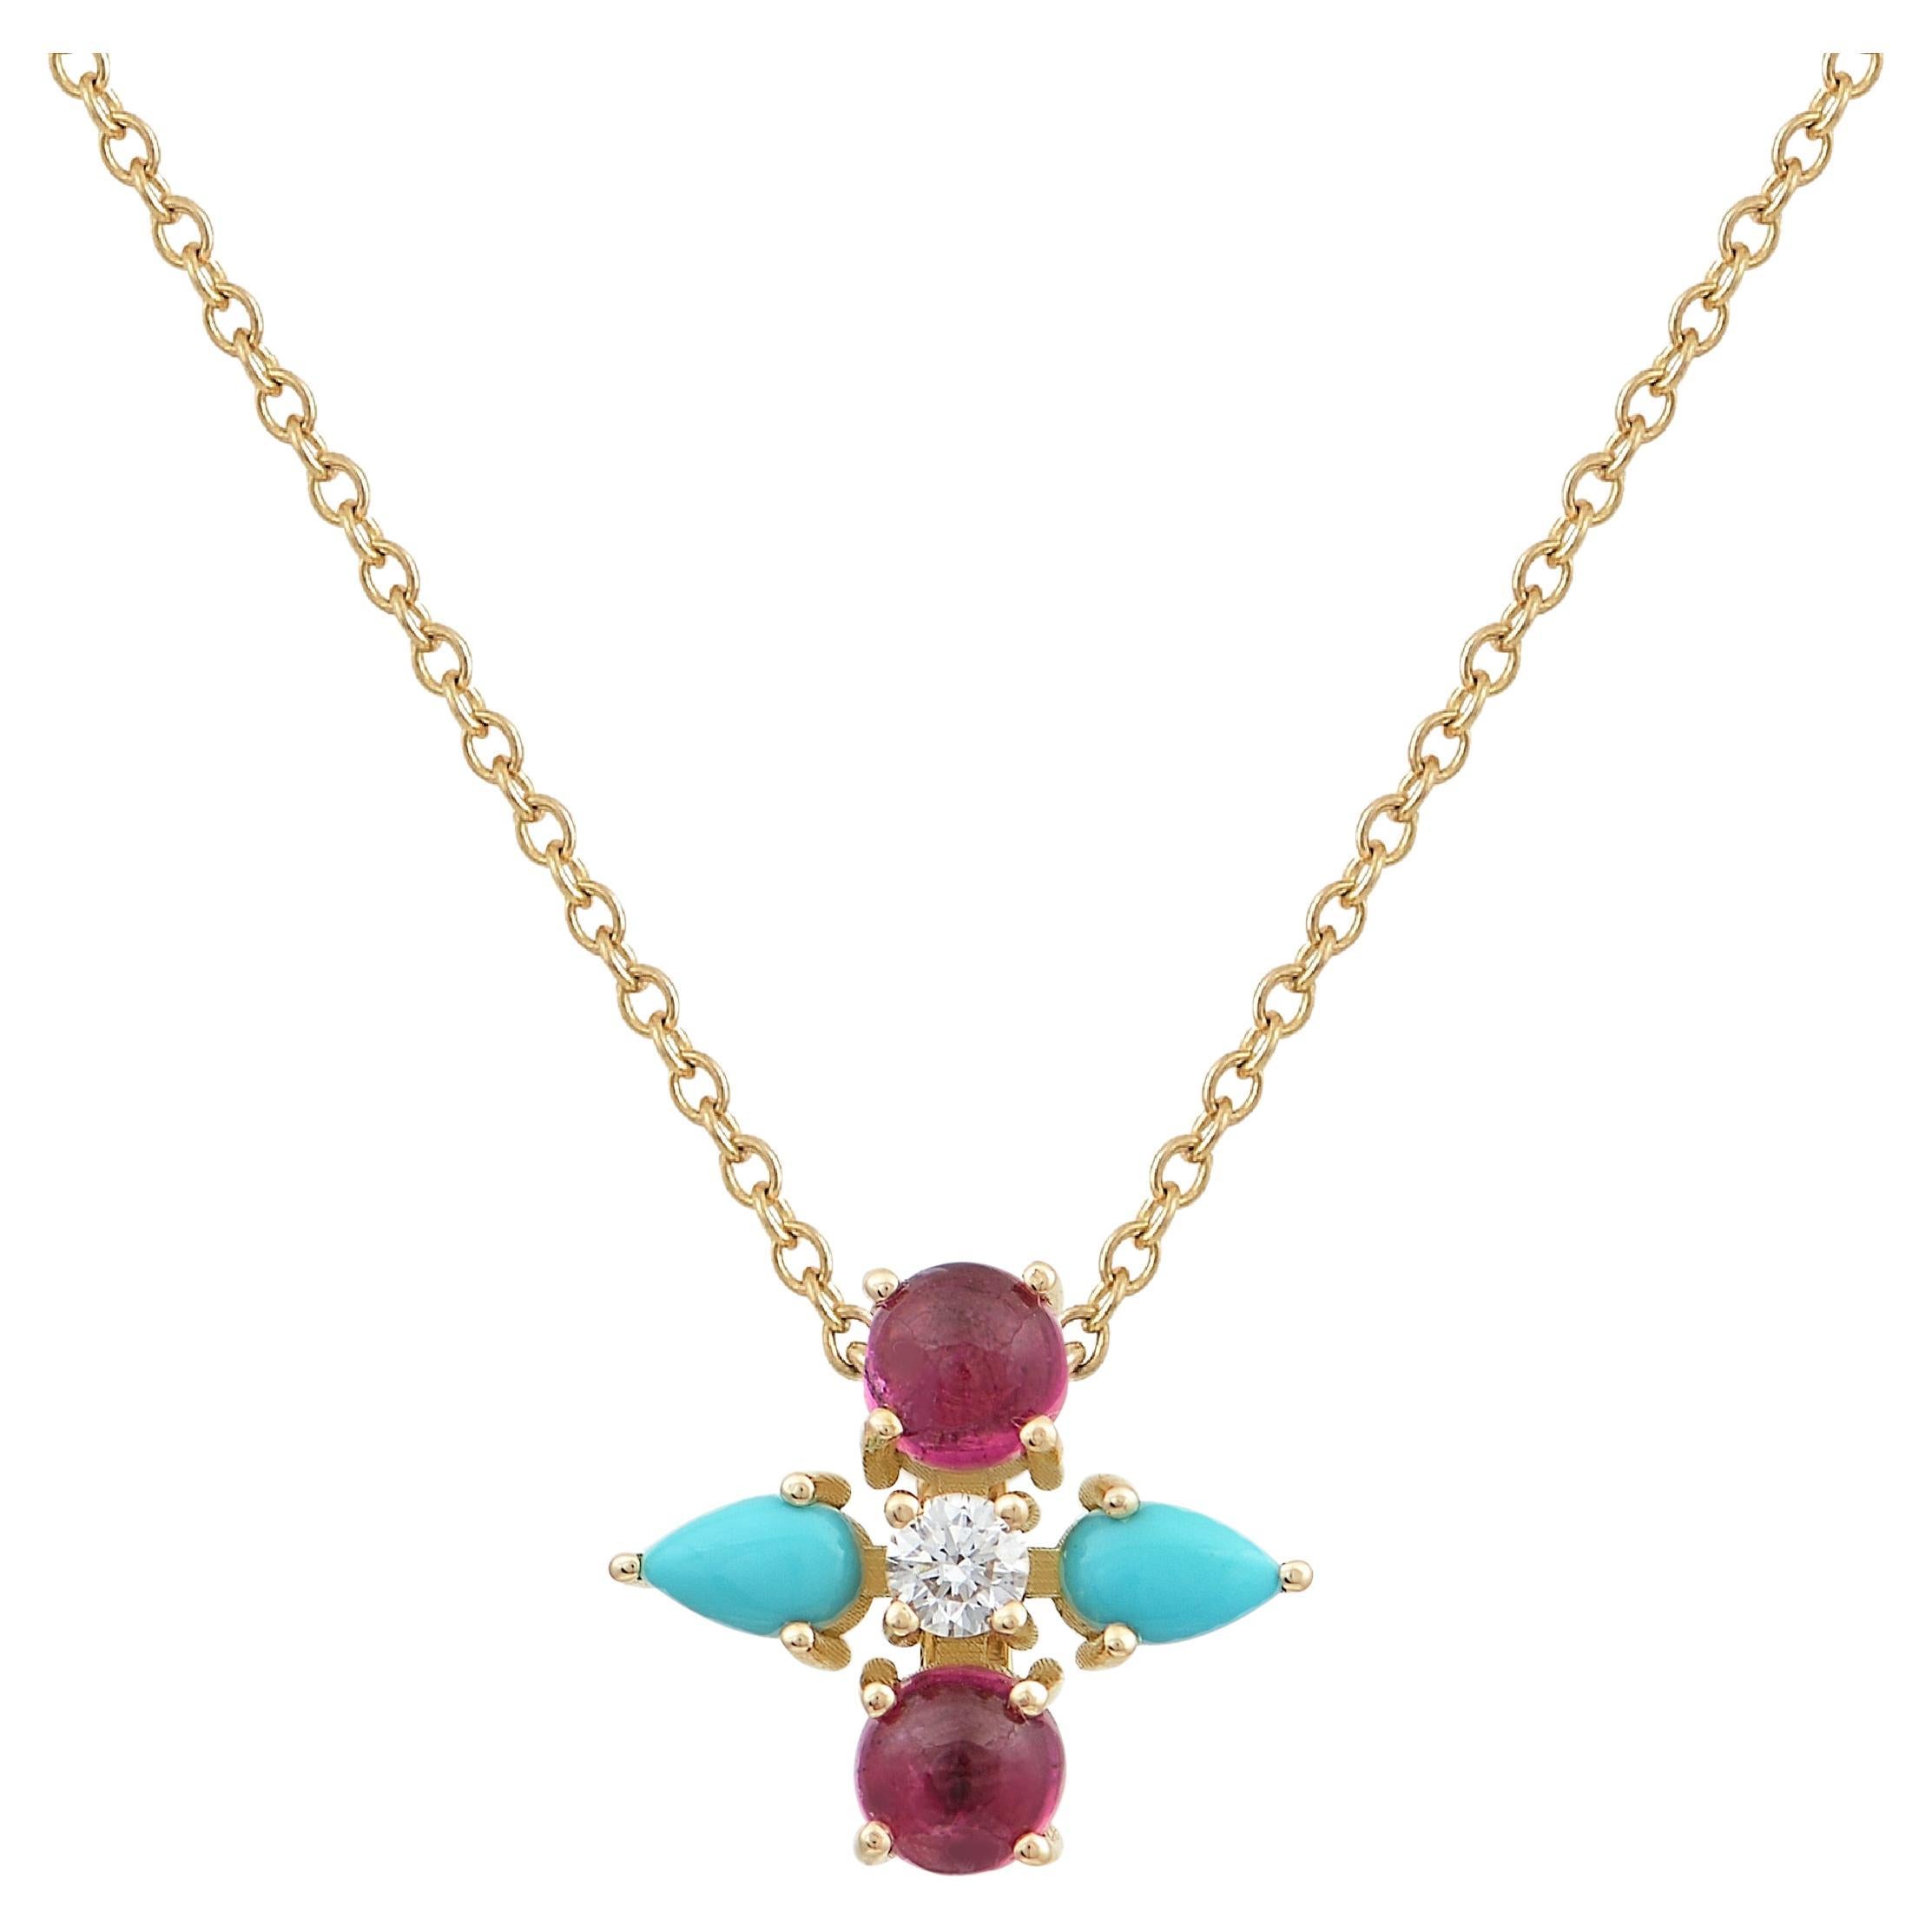 Pendant in 18 Karat Yellow Gold With A Diamond, Pink Tourmaline, Turquoise For Sale